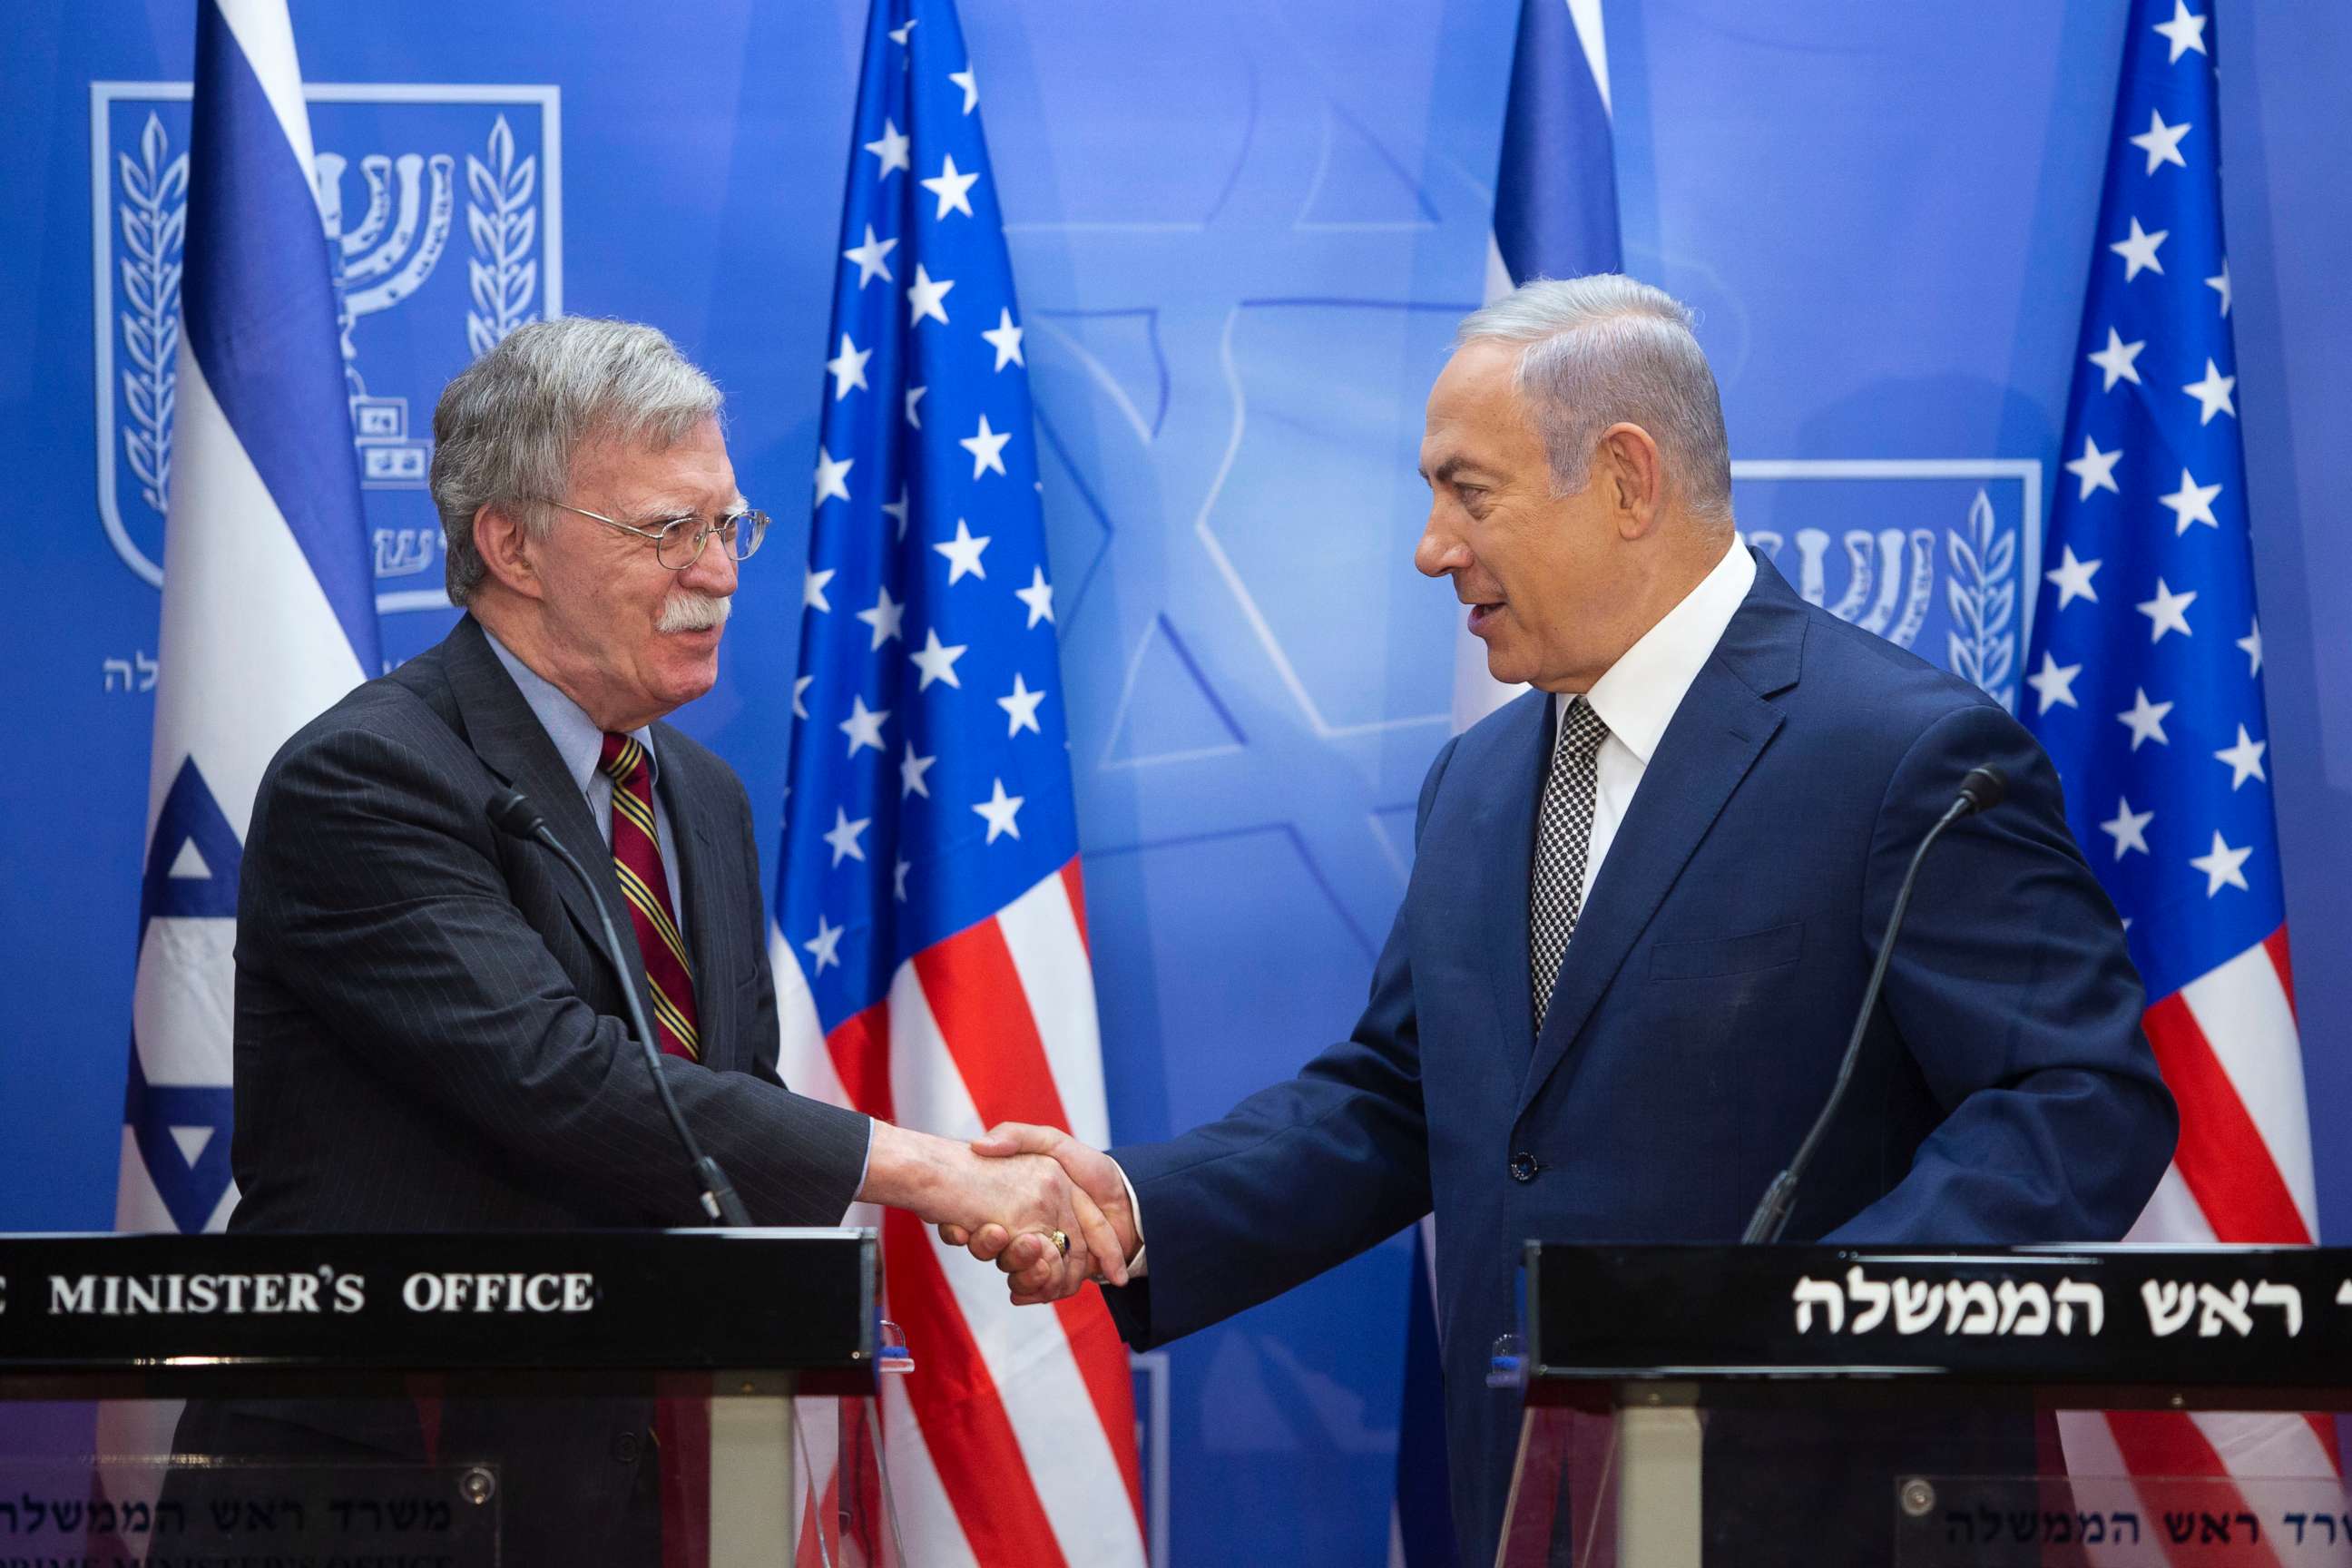 PHOTO: Israeli Prime Minister Benjamin Netanyahu, right, shakes hands with U.S. national security adviser John Bolton during their meeting at the Prime Minister's office in Jerusalem, Aug. 20, 2018.